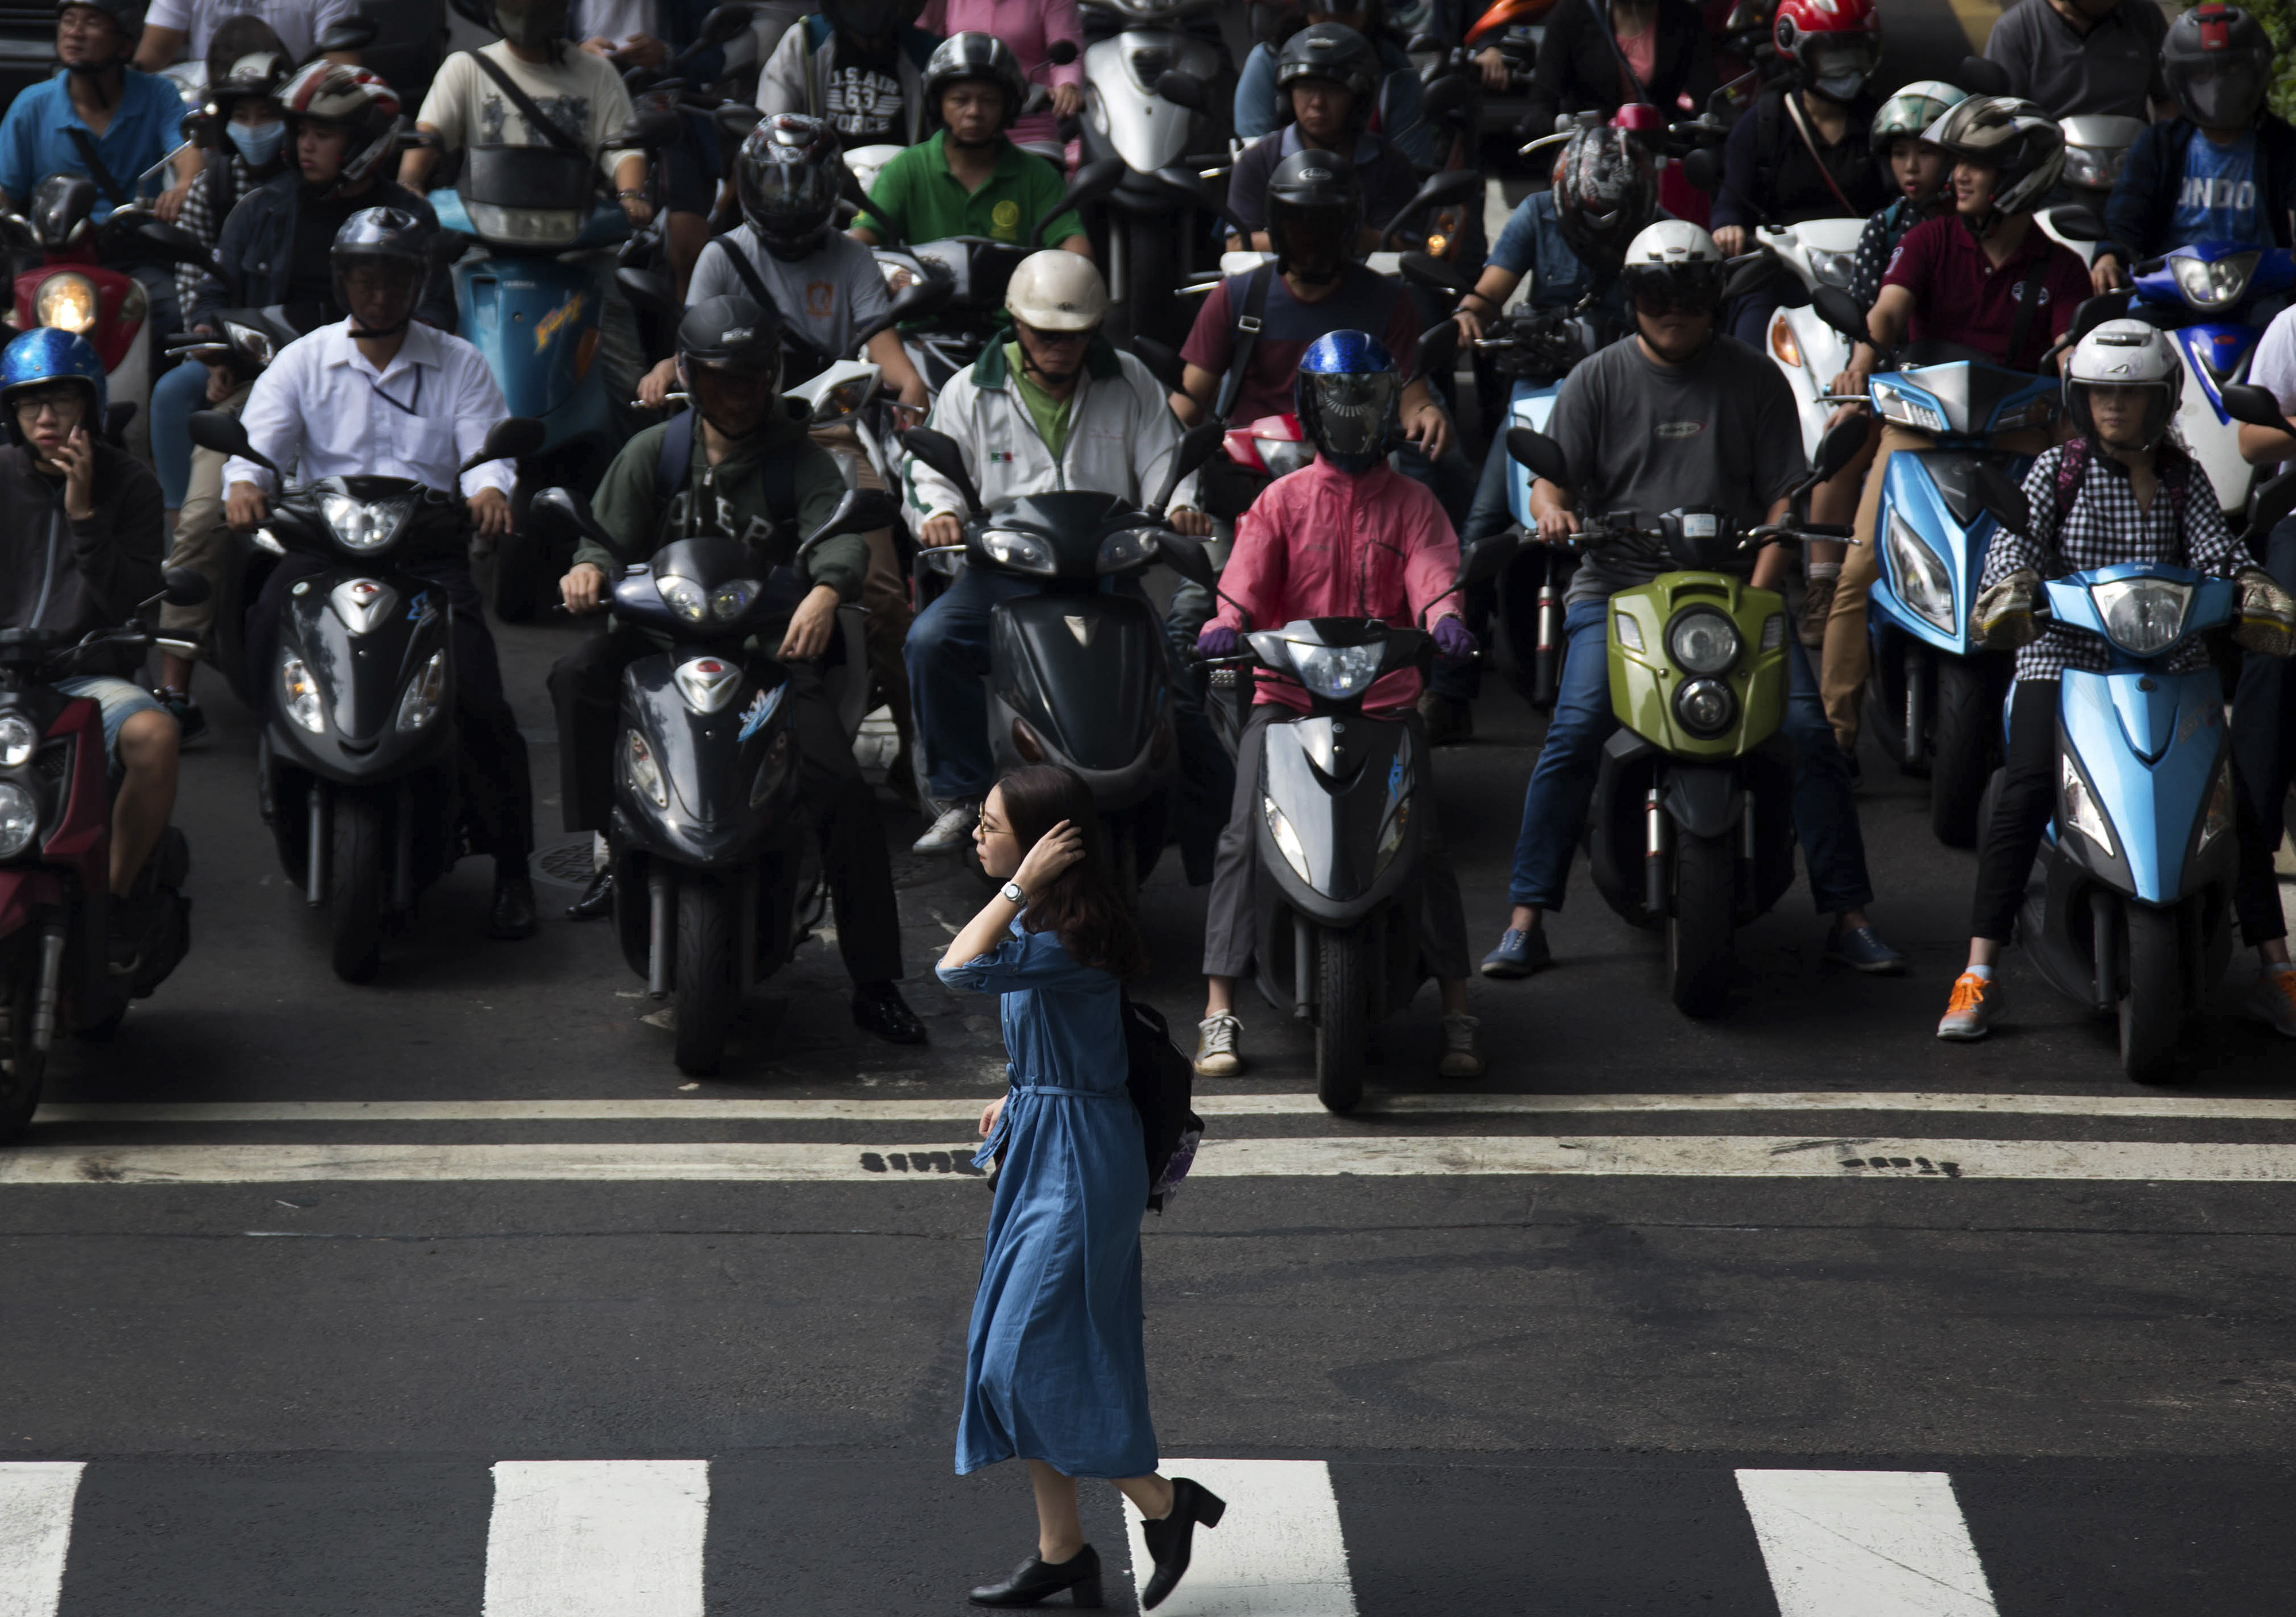 A woman crosses a road as commuters riding on motorcycles wait at a traffic stop in Taipei, Taiwan, on Monday, Nov. 9, 2015. In his meeting Saturday with outgoing Taiwanese President Ma Ying-jeou, Chinese President Xi Jinping put the relationship across the Taiwan Strait in clear terms: Stick together, and prosper. Shake things up, and sink the peace. Photographer: Tomohiro Ohsumi/Bloomberg ORG XMIT: 591161613